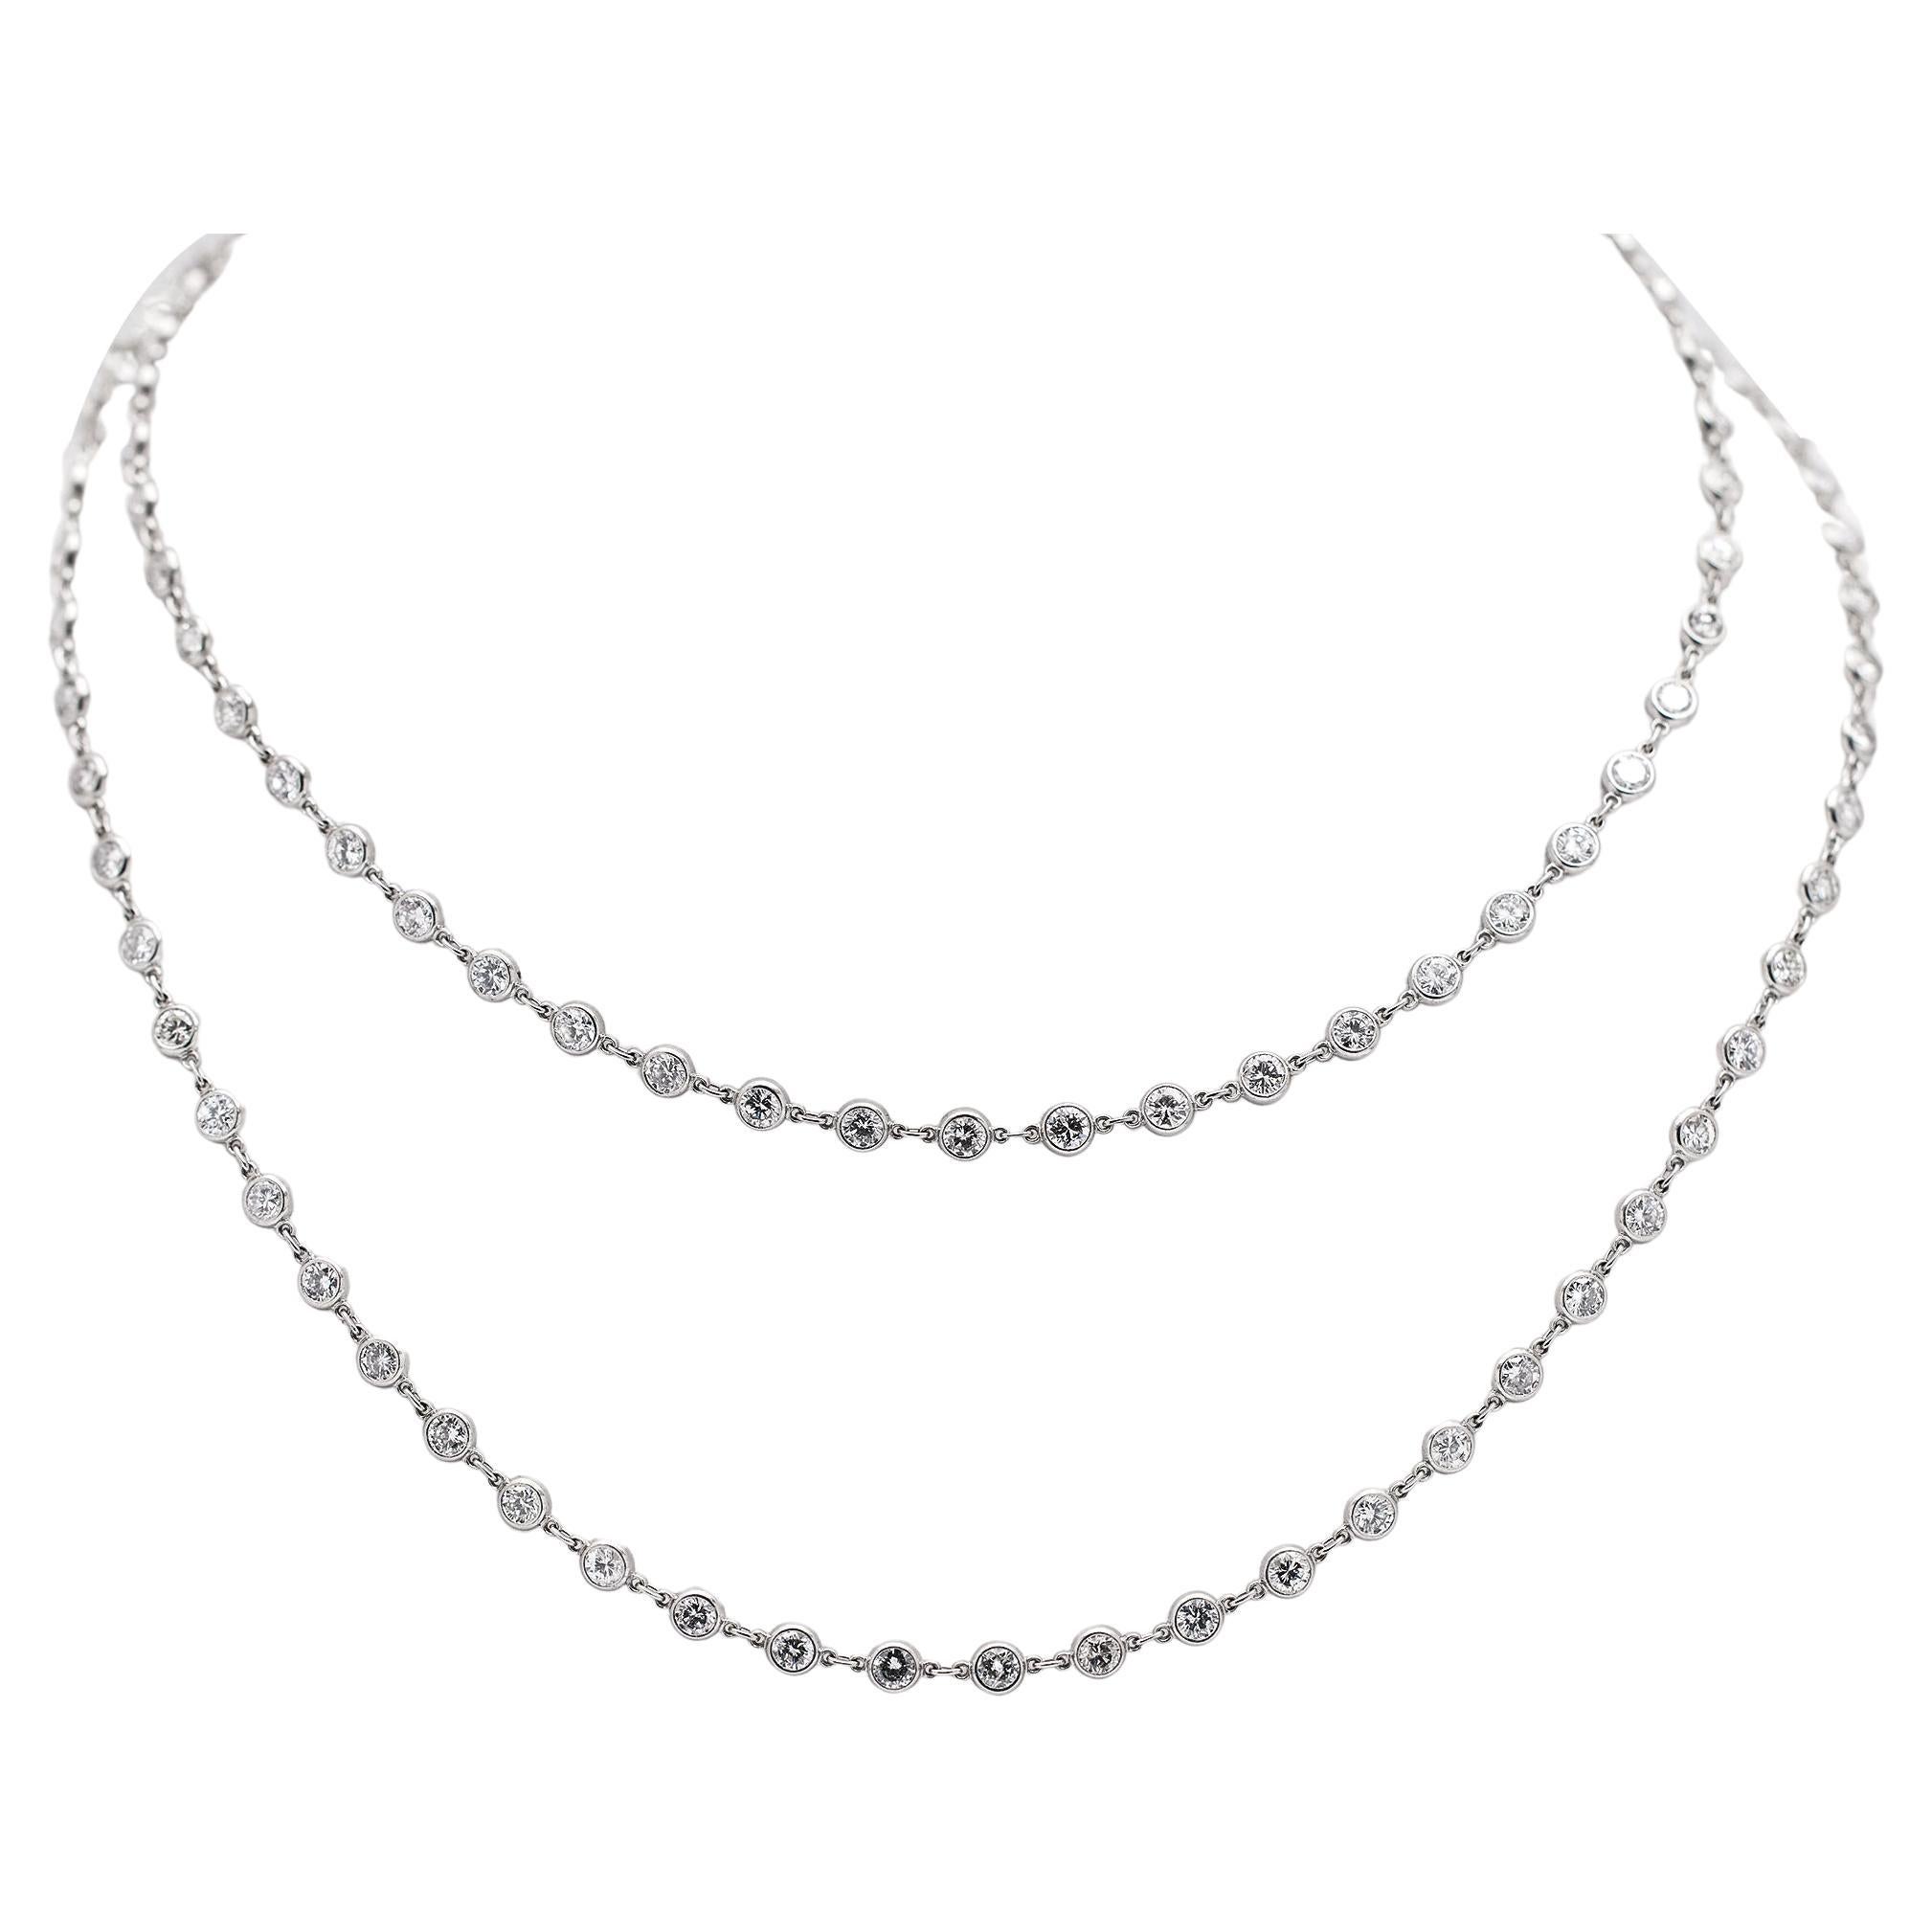 Vintage Platinum Diamond by the Yard Chain Necklace